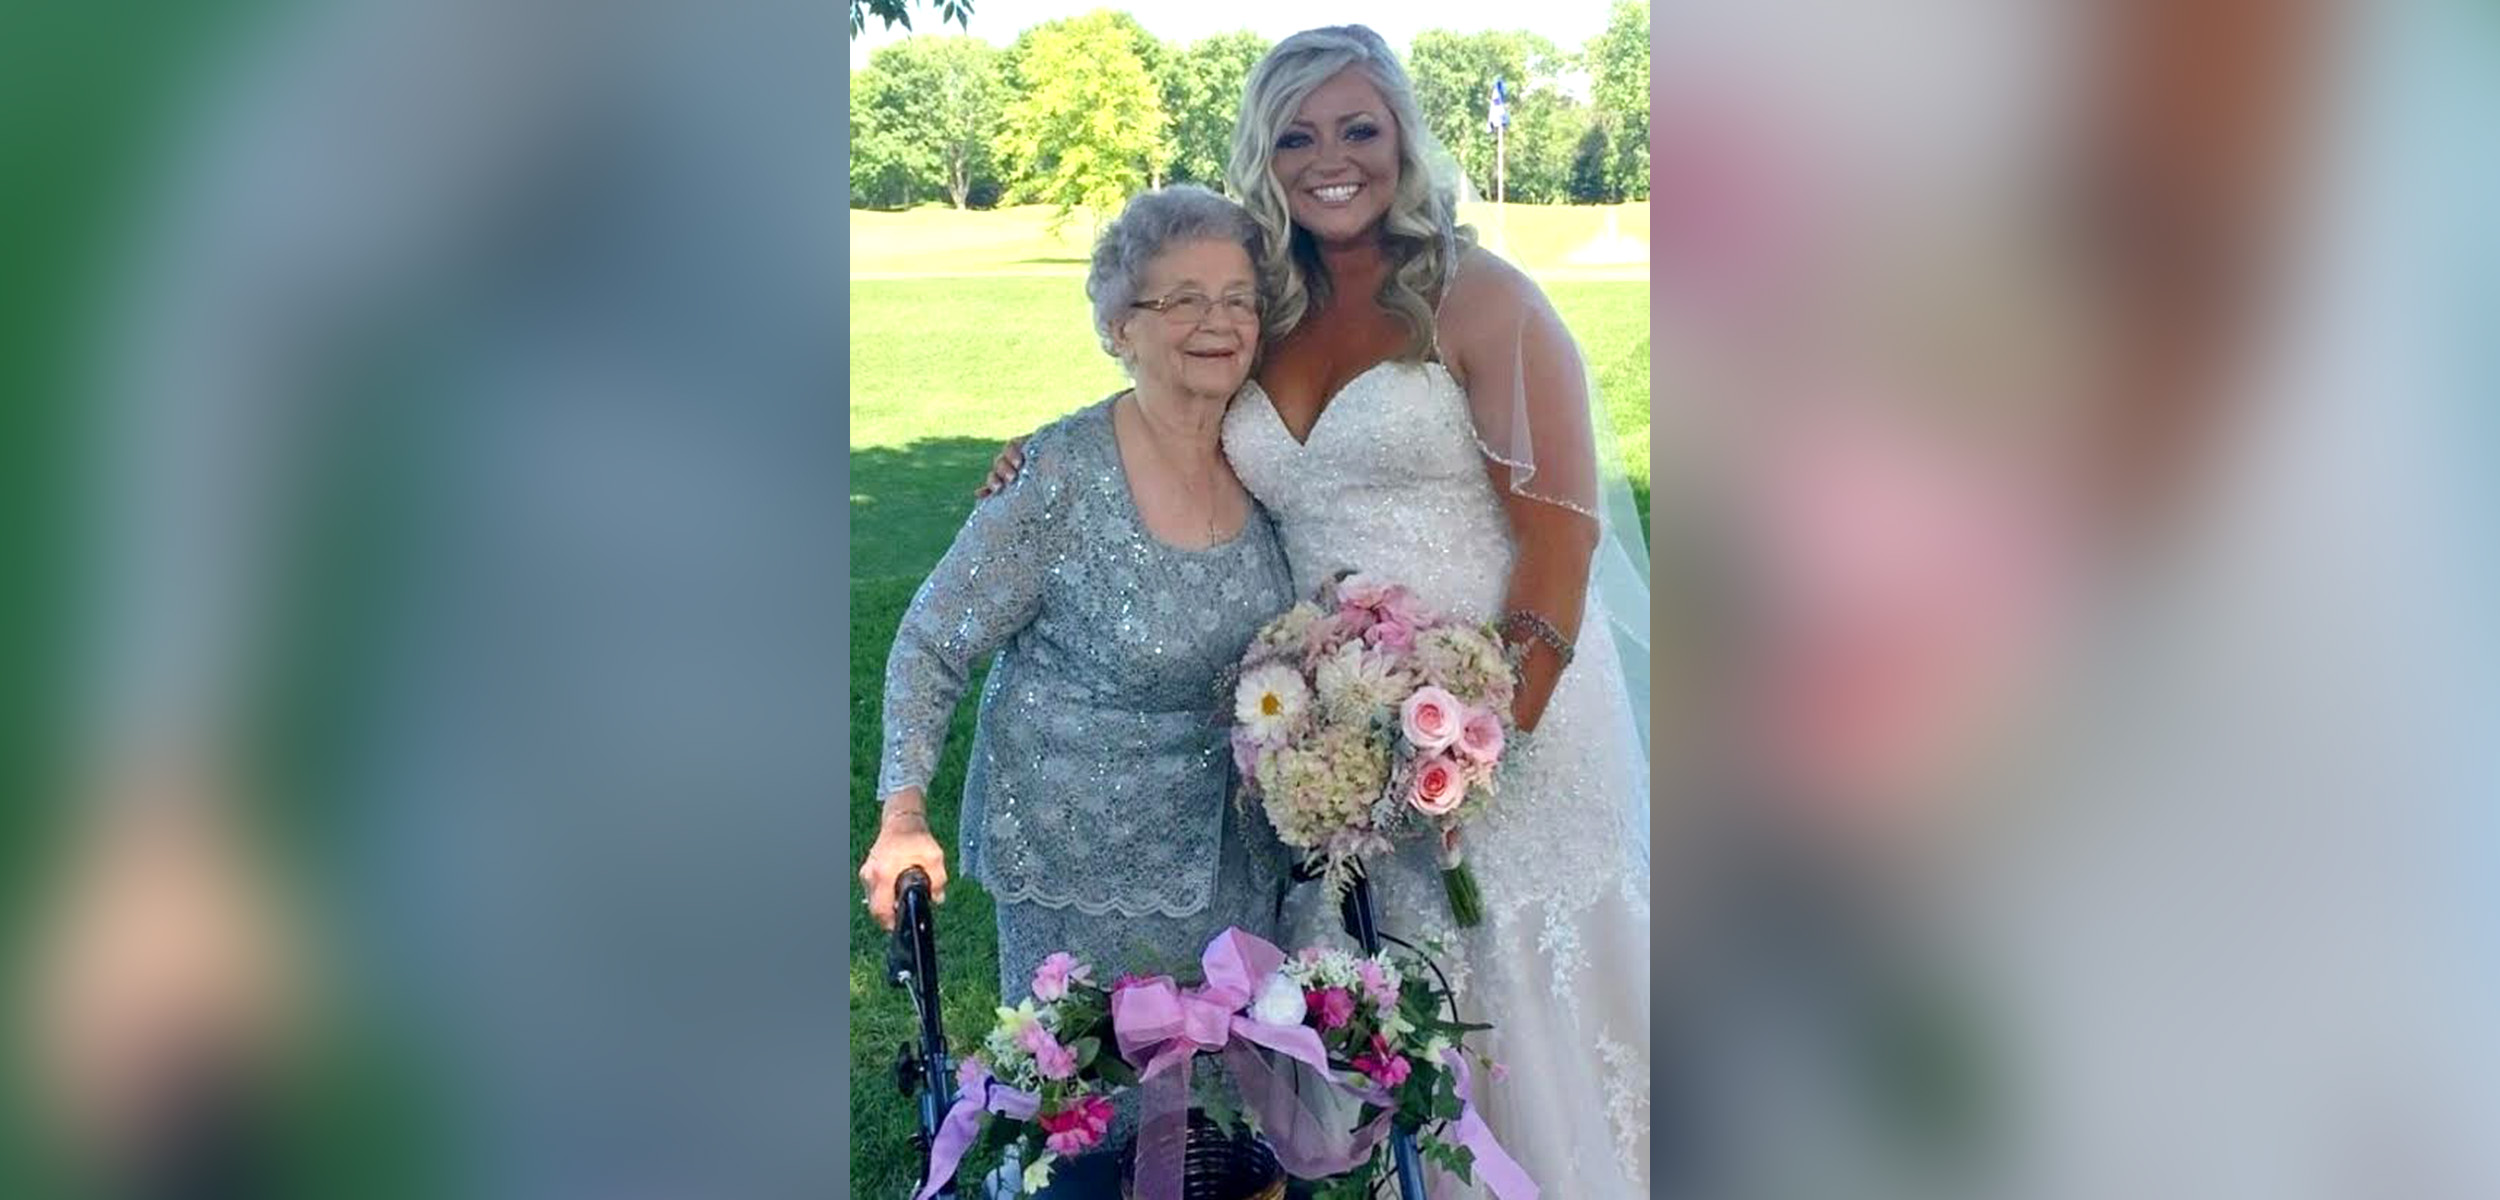 PHOTO: Bride Abby Mershon's 92-year-old grandmother, Georgiana Arlt, grinned from ear to ear as she served as the flower girl on July 1, 2017.